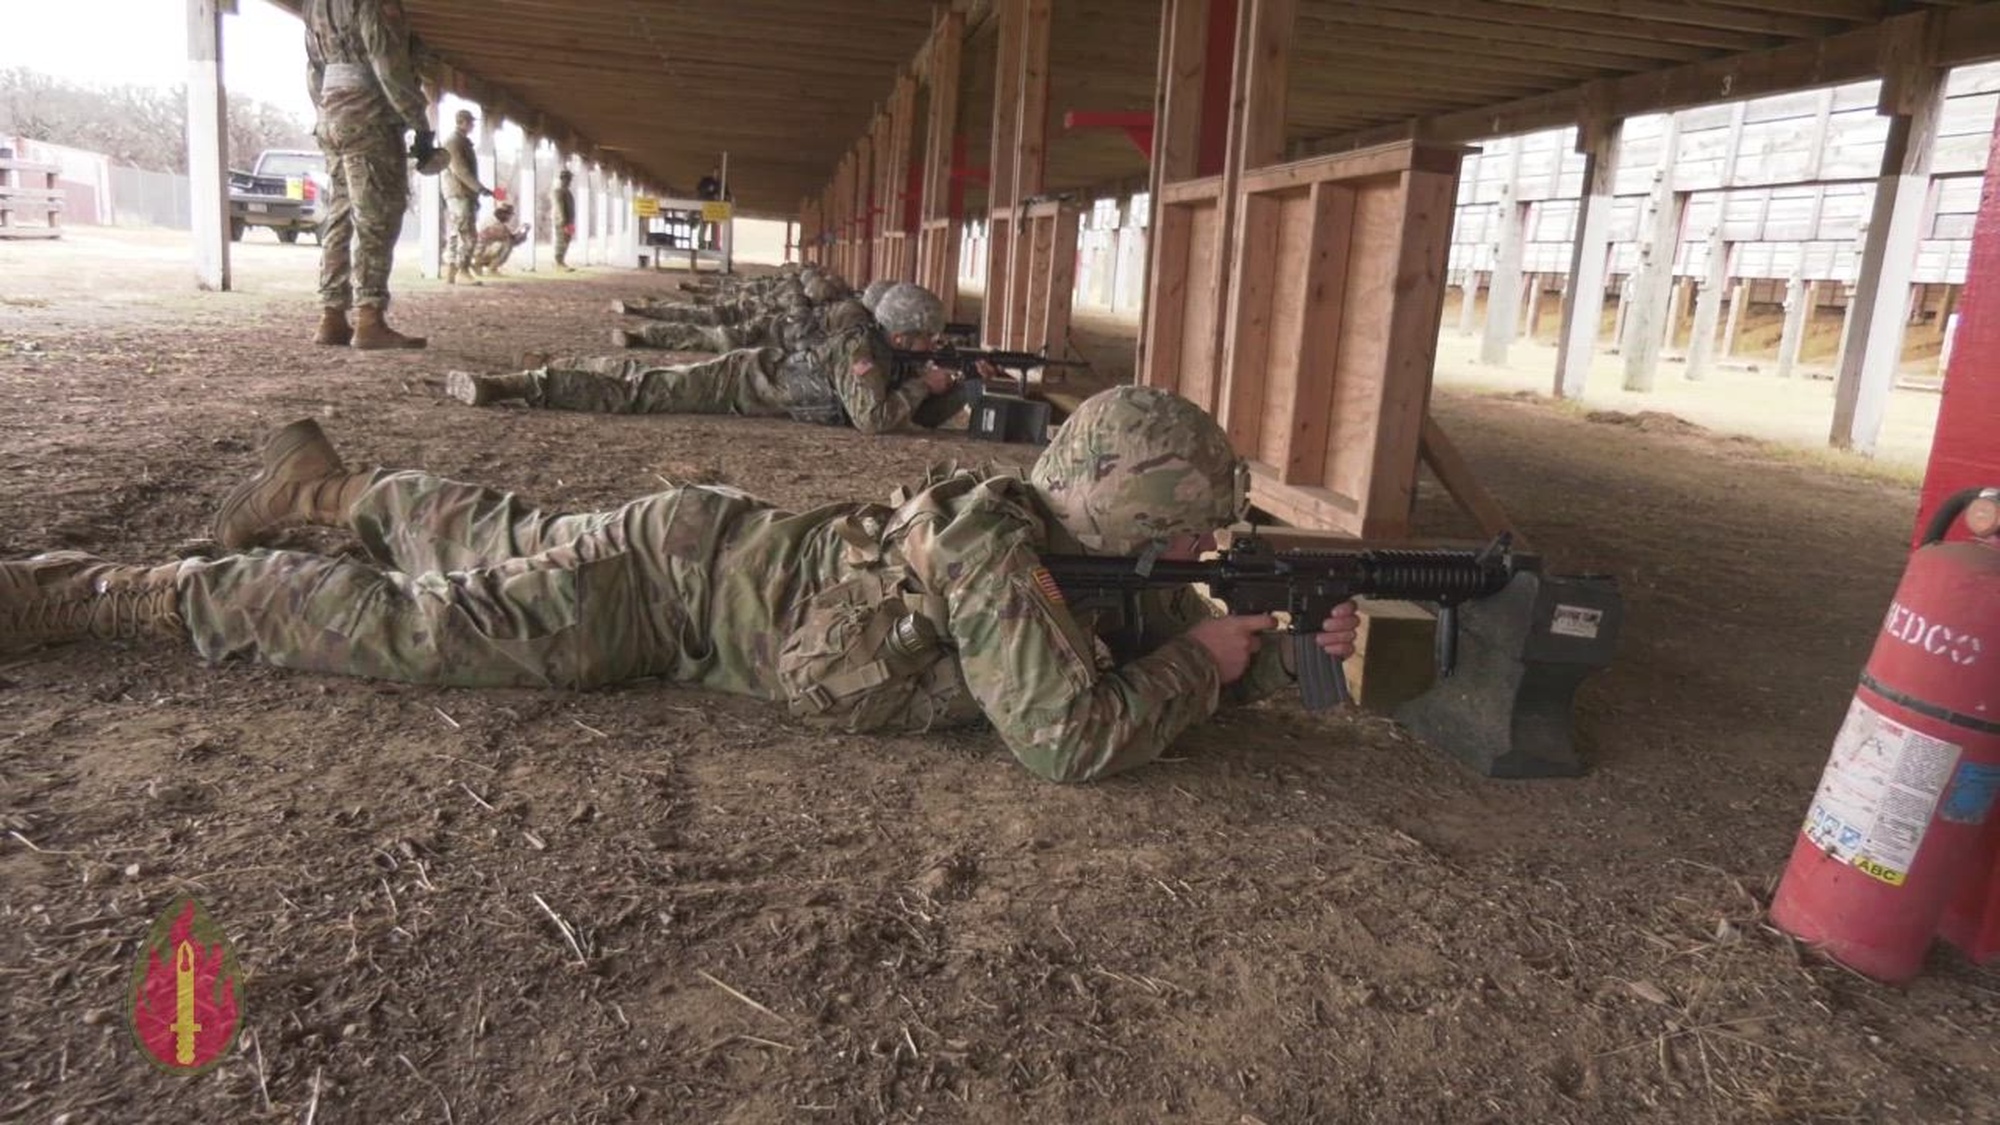 Public Affairs troops of the 206th BOD go to the range in Seagoville, TX to sharpen their Soldier skills.